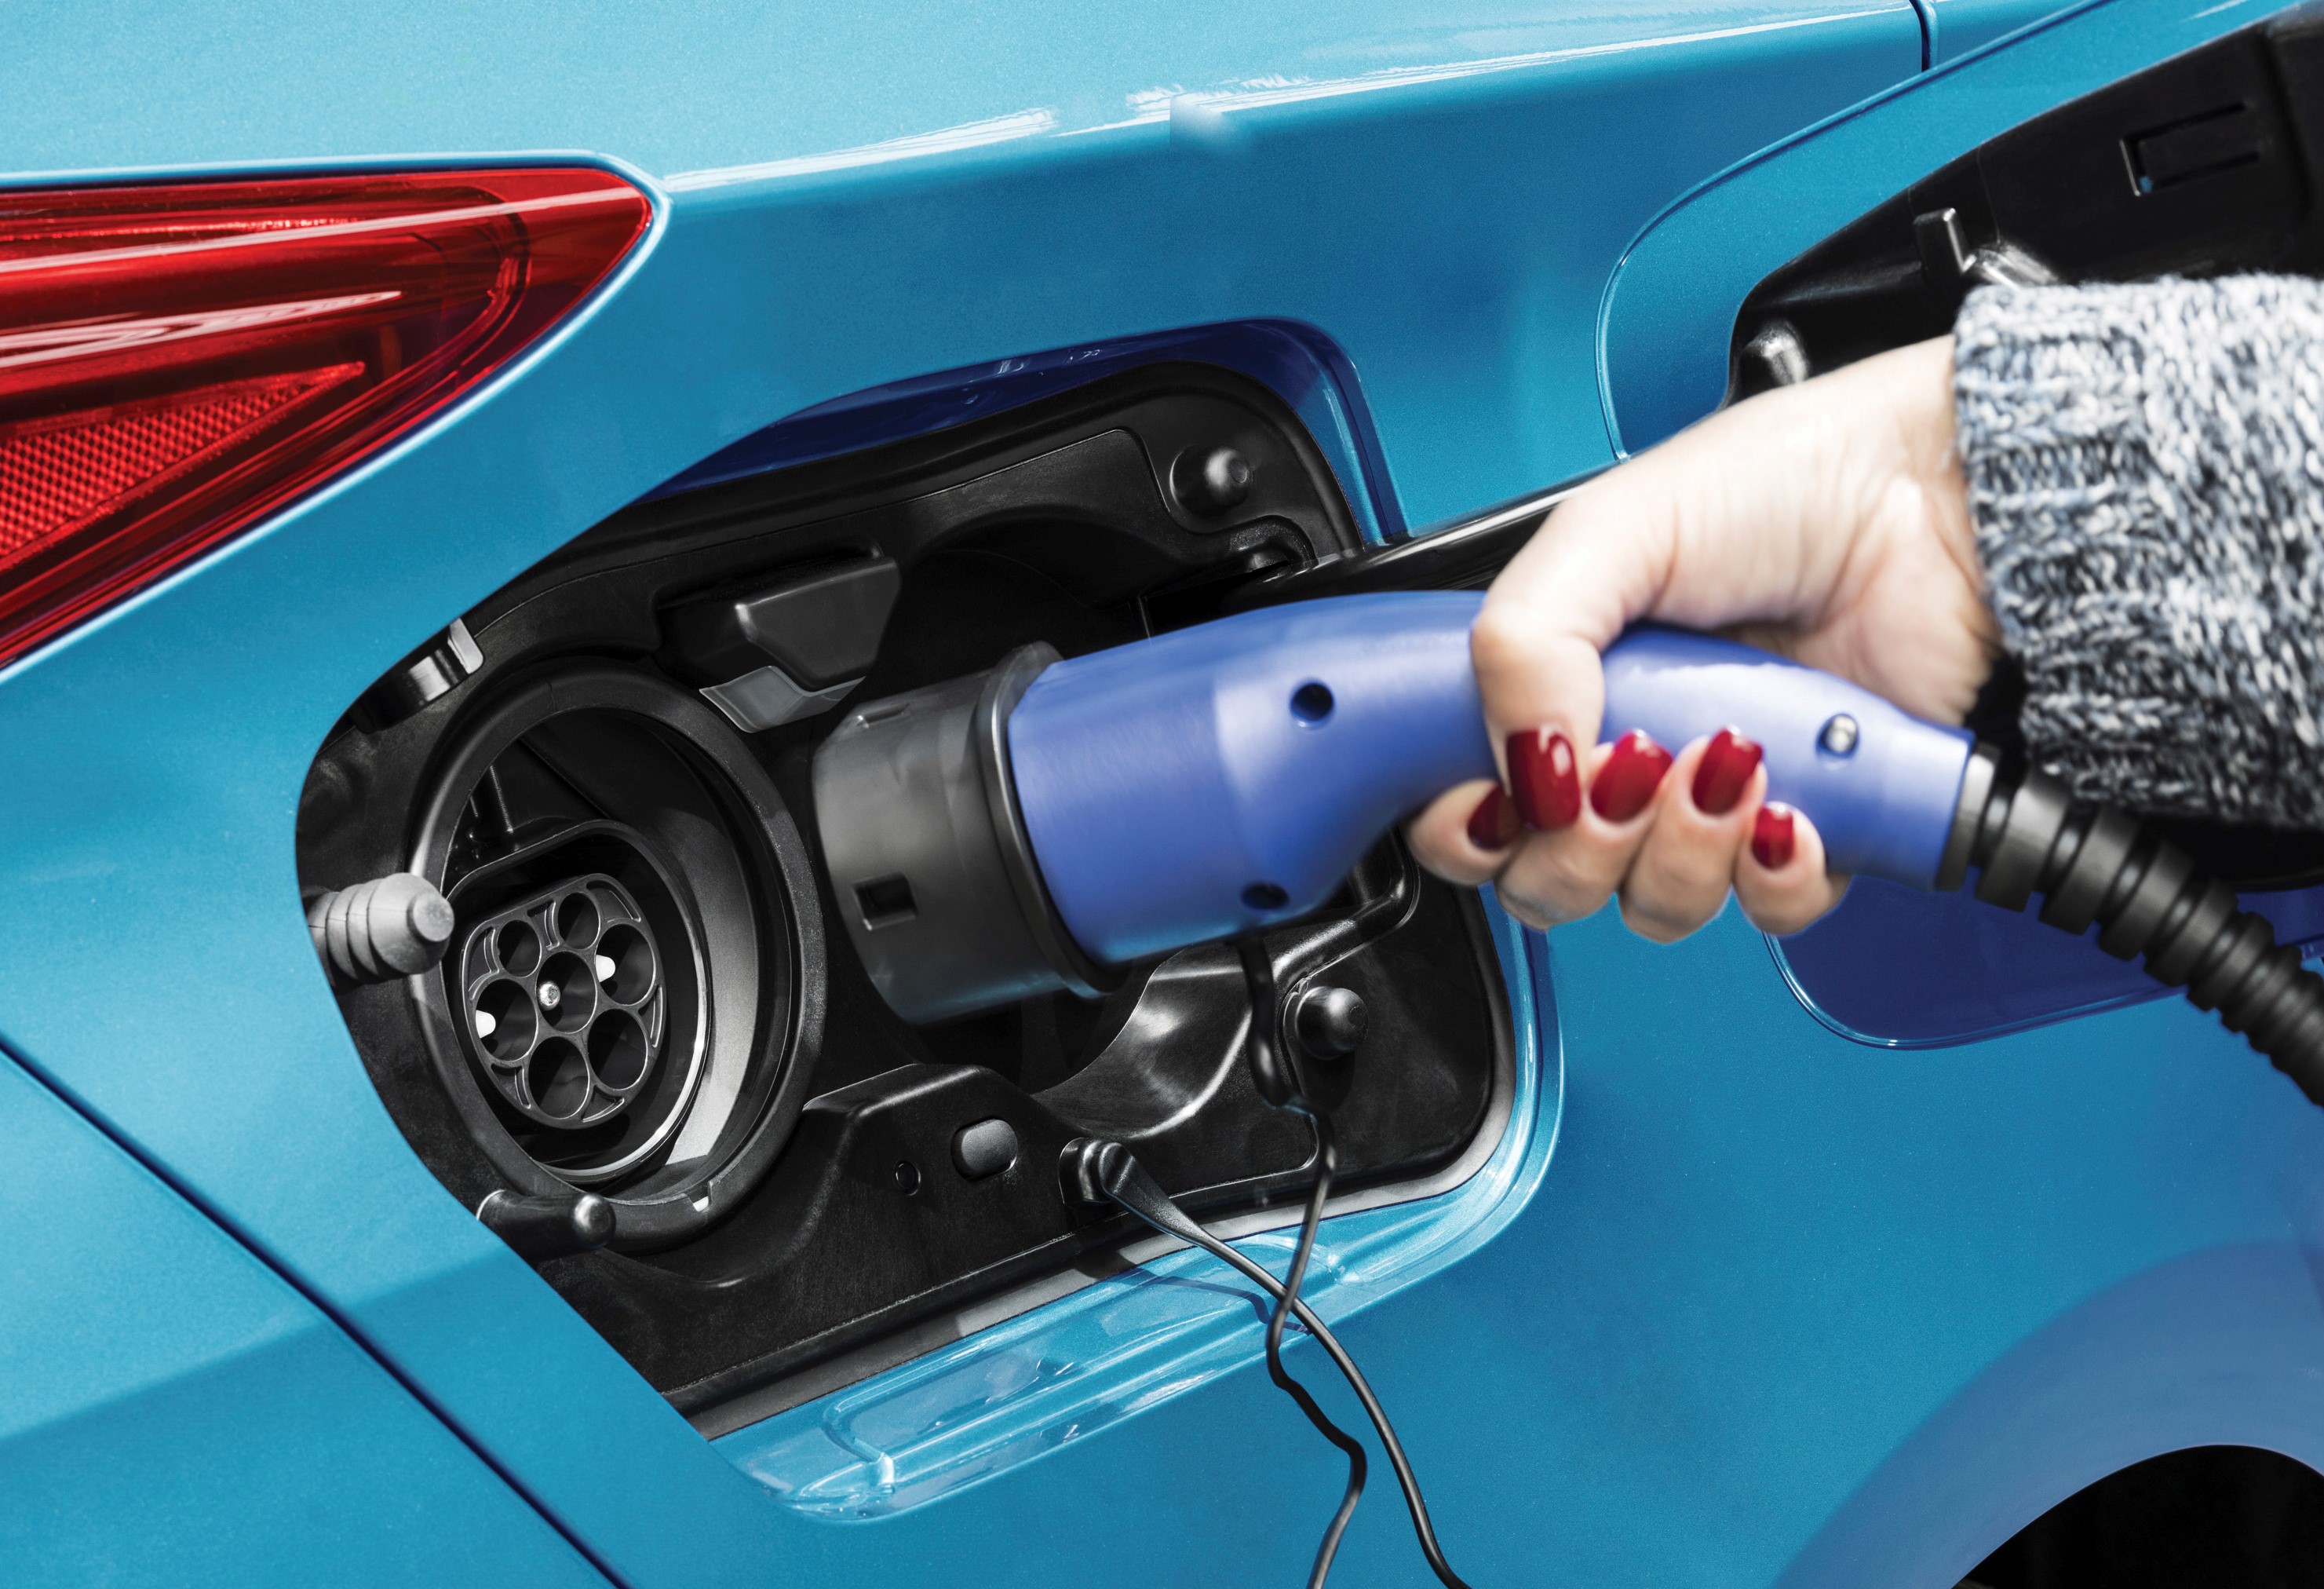 Plugin Hybrid Electric Vehicles Are They All the Same? News and